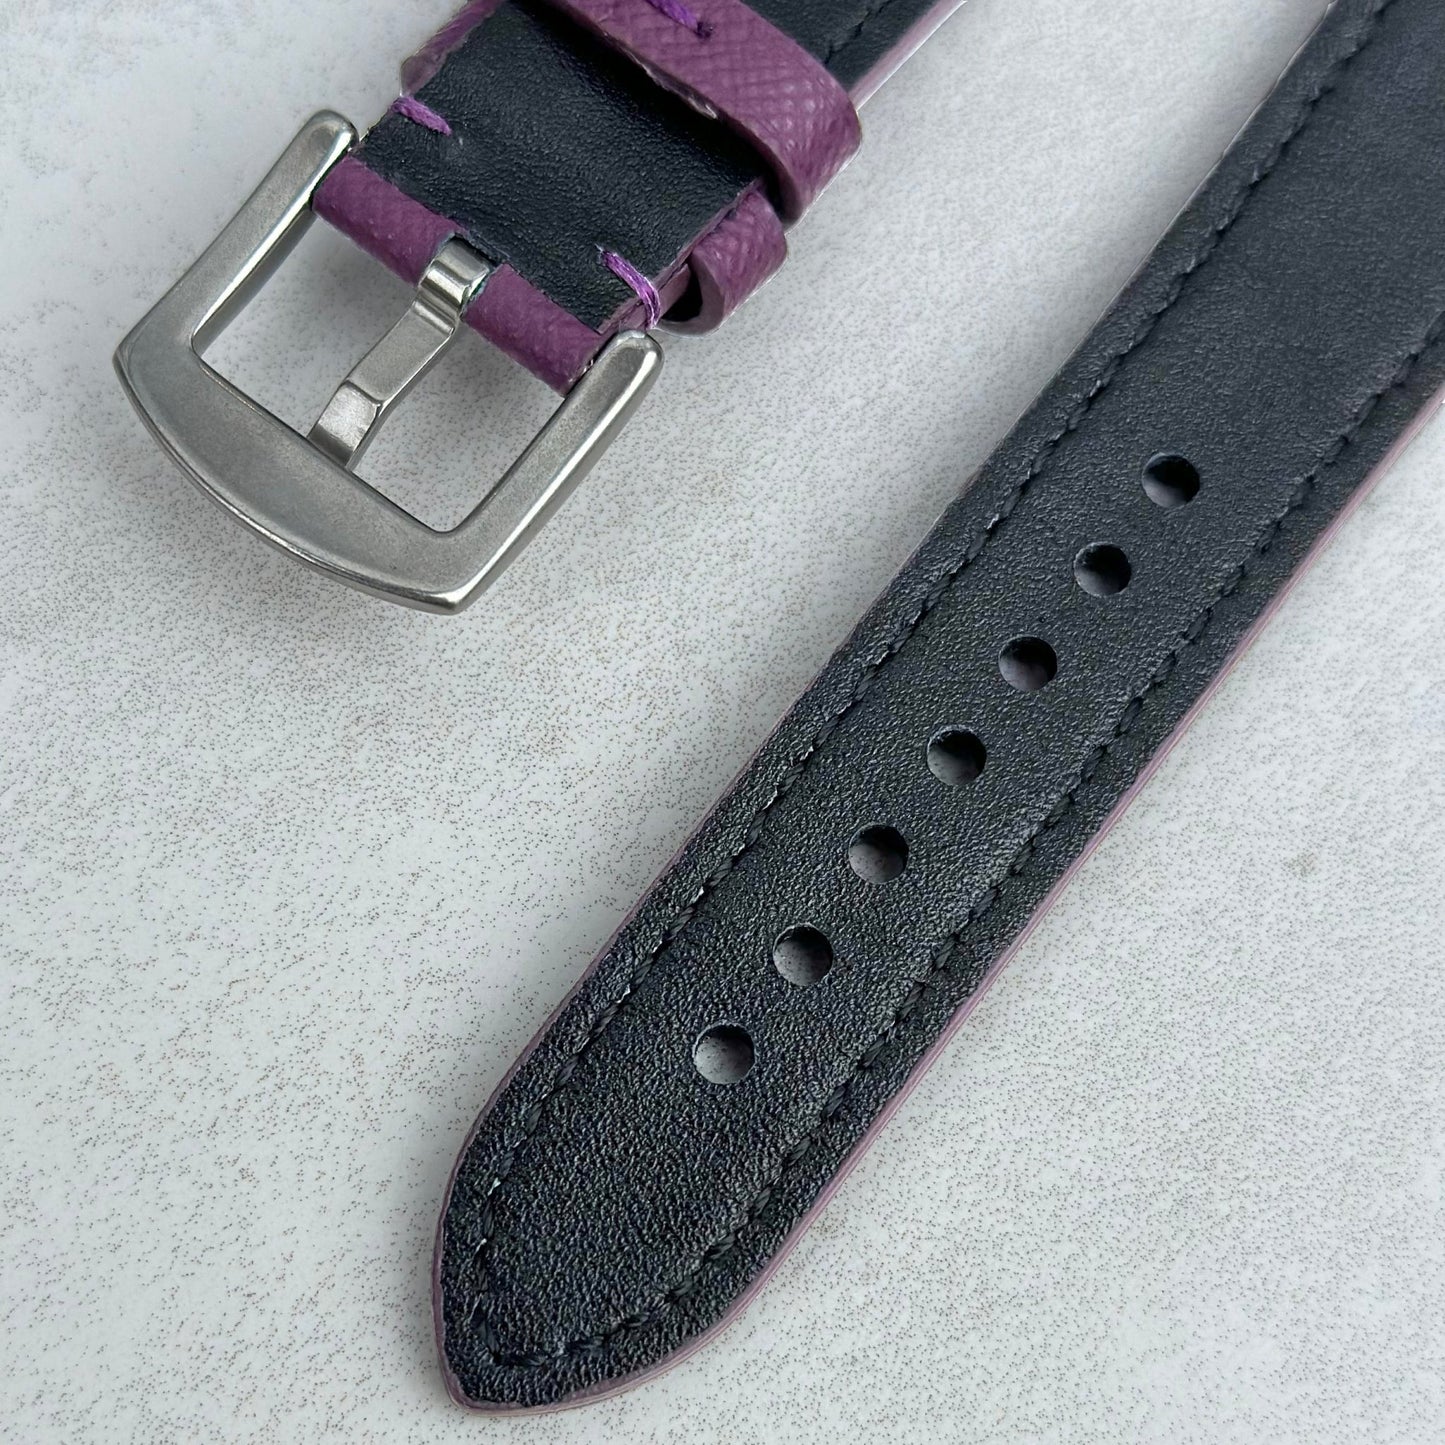 Rear of the brushed 316L stainless steel buckle on the Saffiano leather watch strap. Watch And Strap.